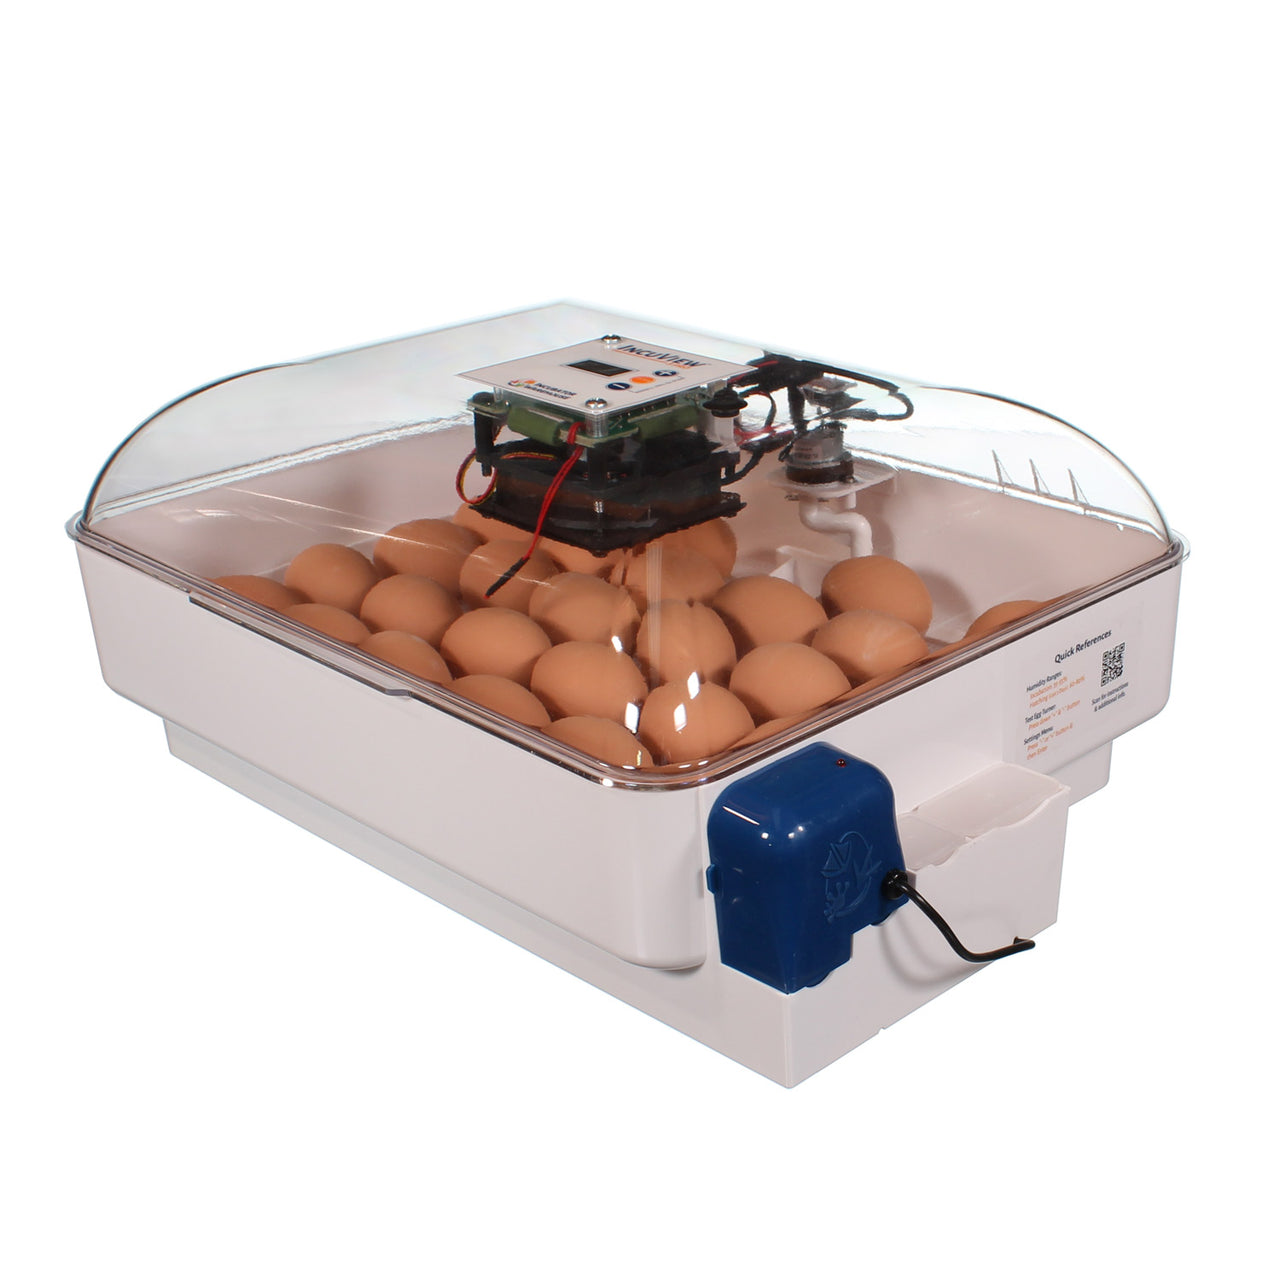 IncuView 3 Pro All-In-One Automatic Egg Incubator